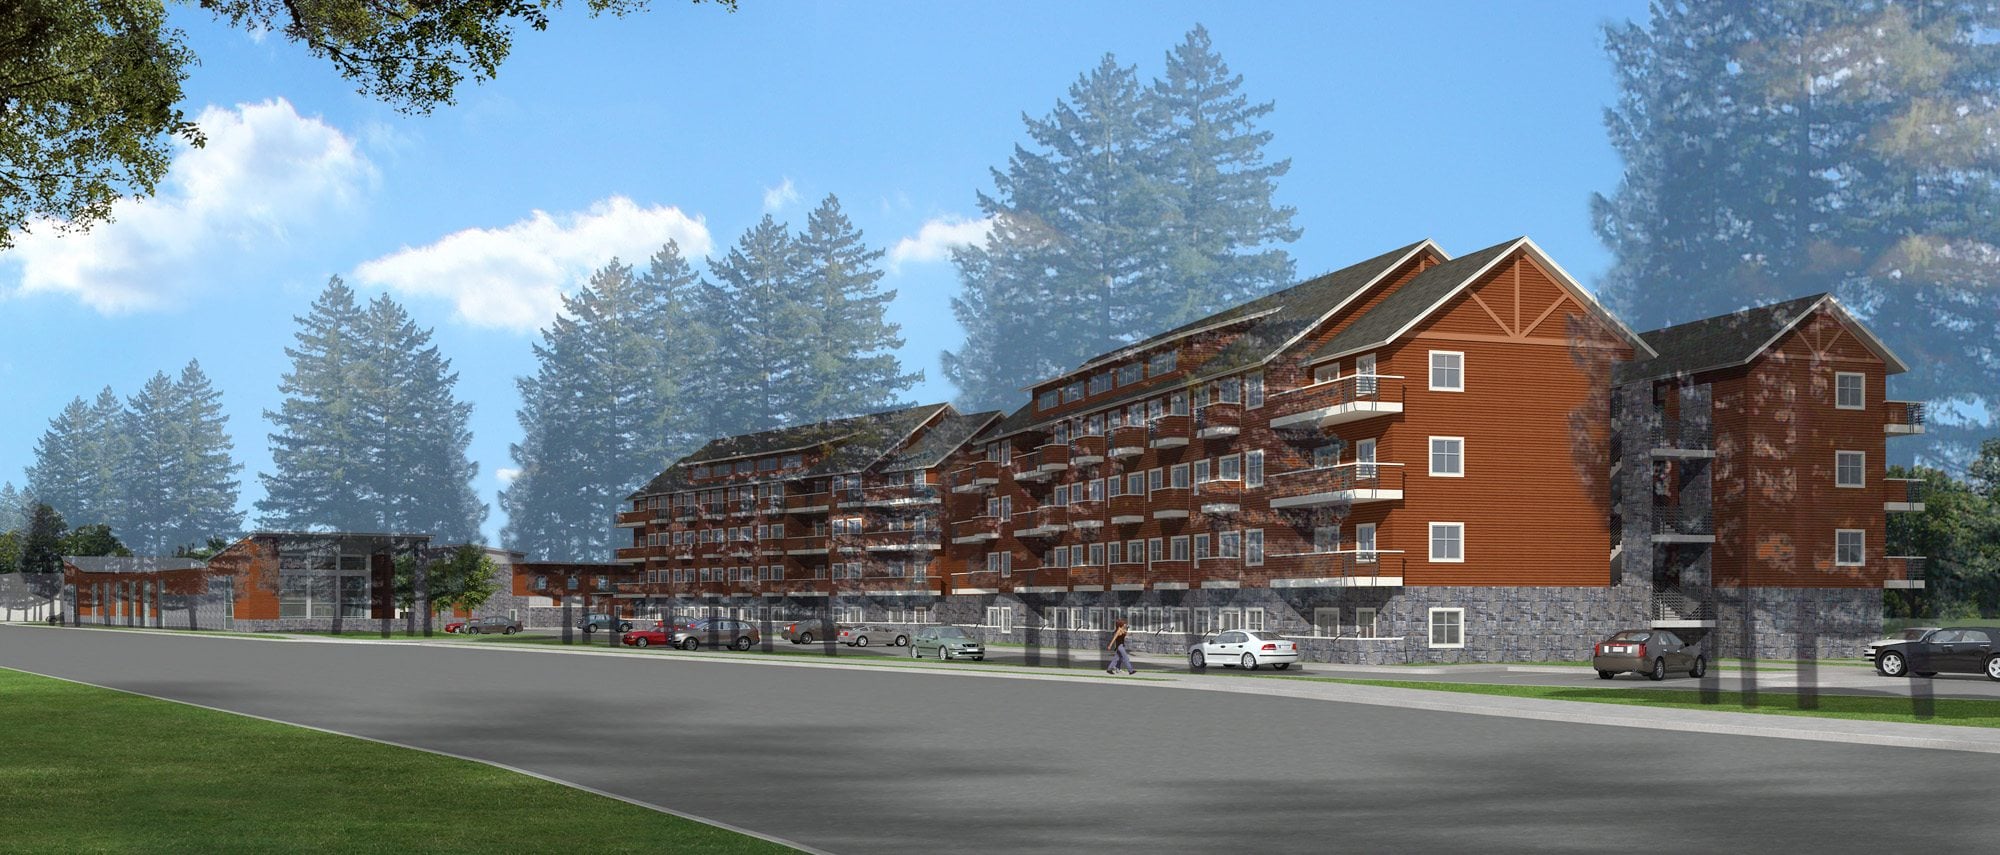 Construction is expected to start this fall on the planned $22 million Westridge Lofts apartment complex, which will bring high-end apartments and hotel units to the southeast corner of Southeast 192nd Avenue and 20th Street on the Vancouver side of its border with Camas.